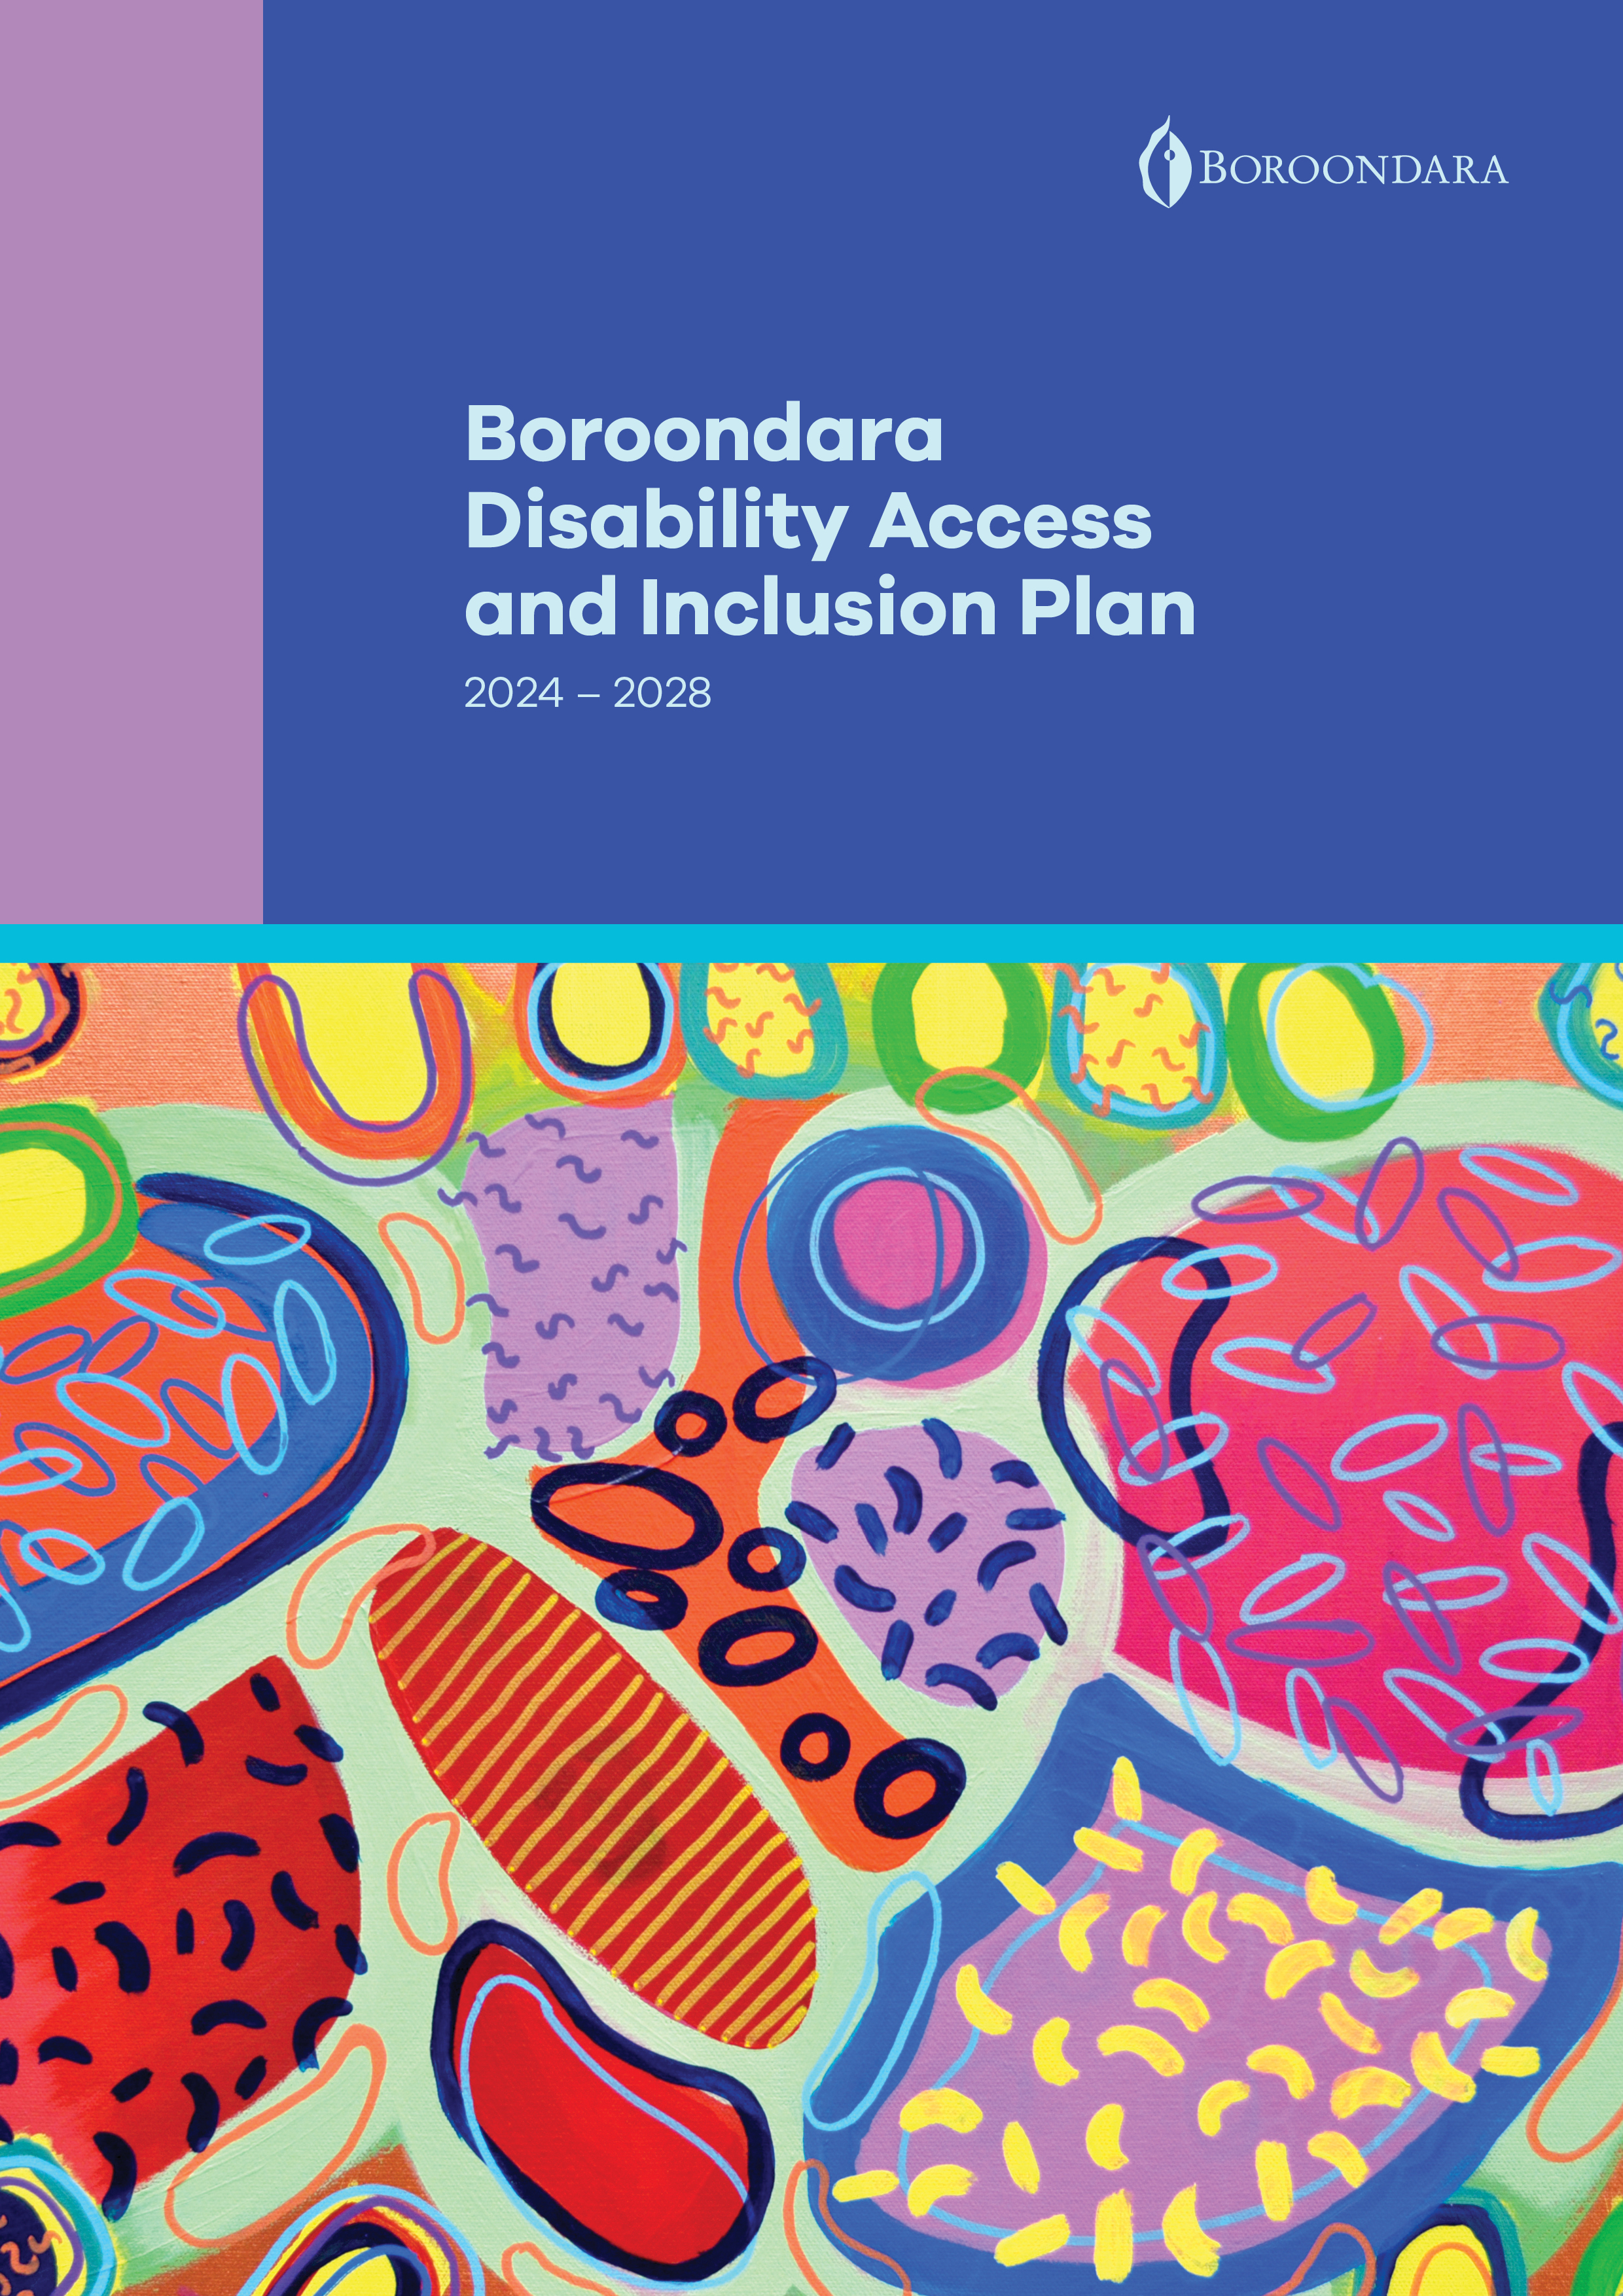 Cover image of Disability Access and inclusion plan showing colourful abstract drawing